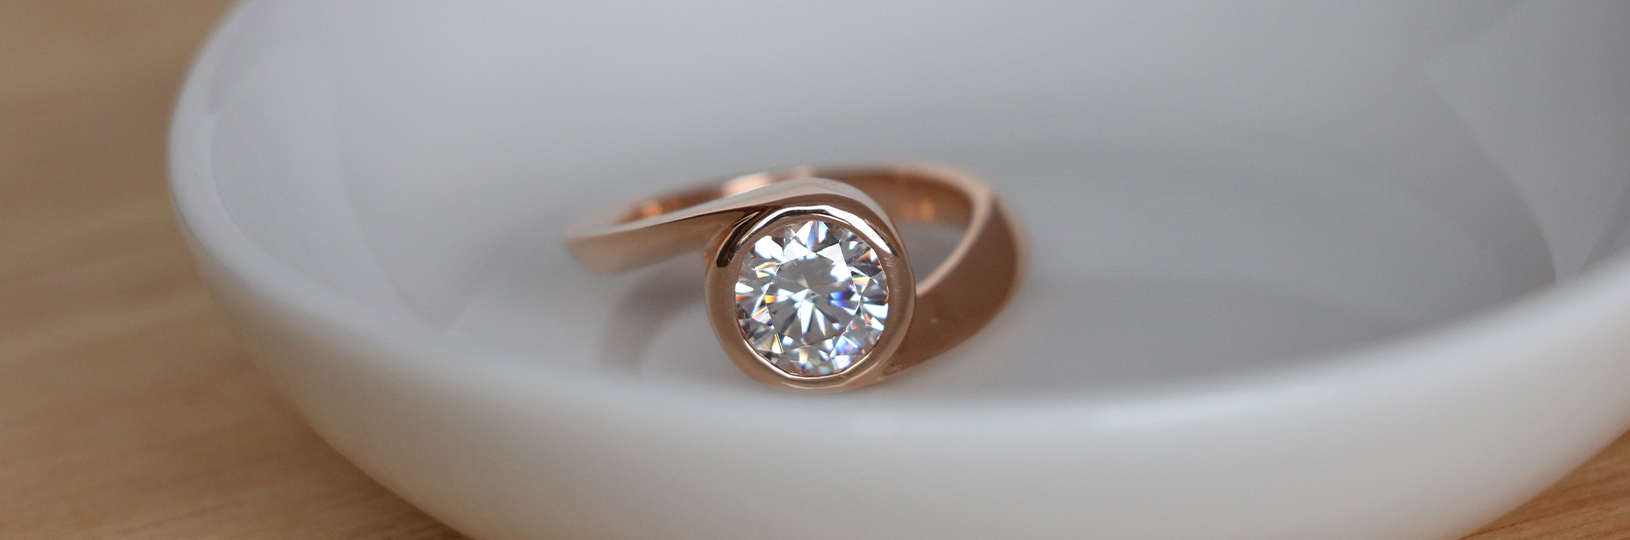 An engagement ring with a bezel setting